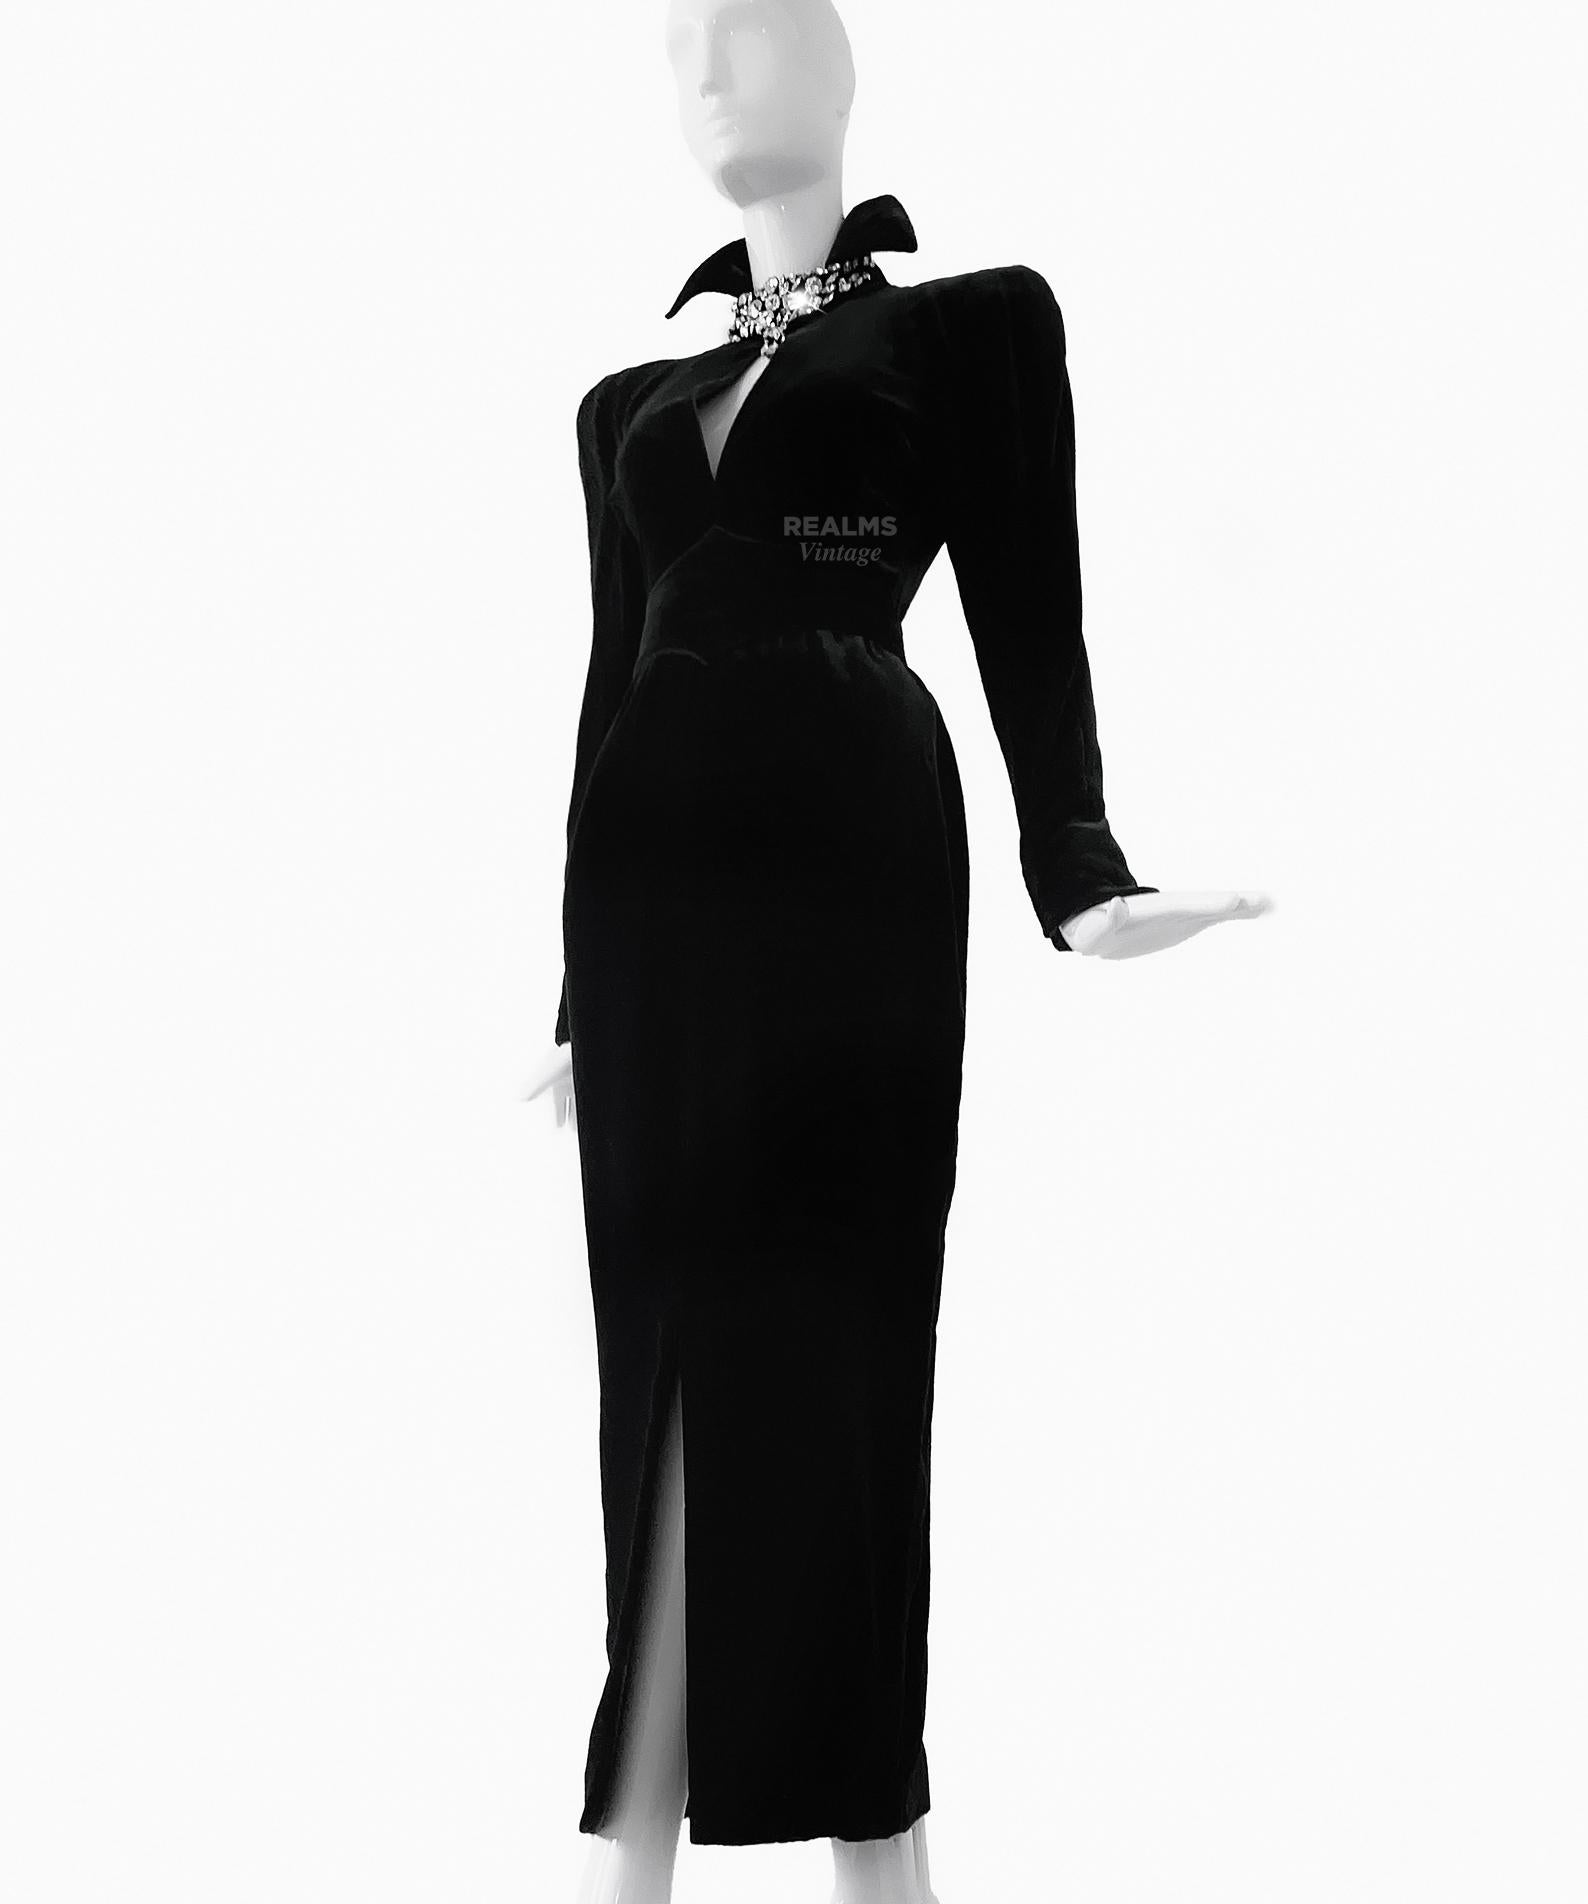 Stunning Thierry Mugler Archival  FW 1986 Evening Gown Crytsal Black Dress  For Sale 6